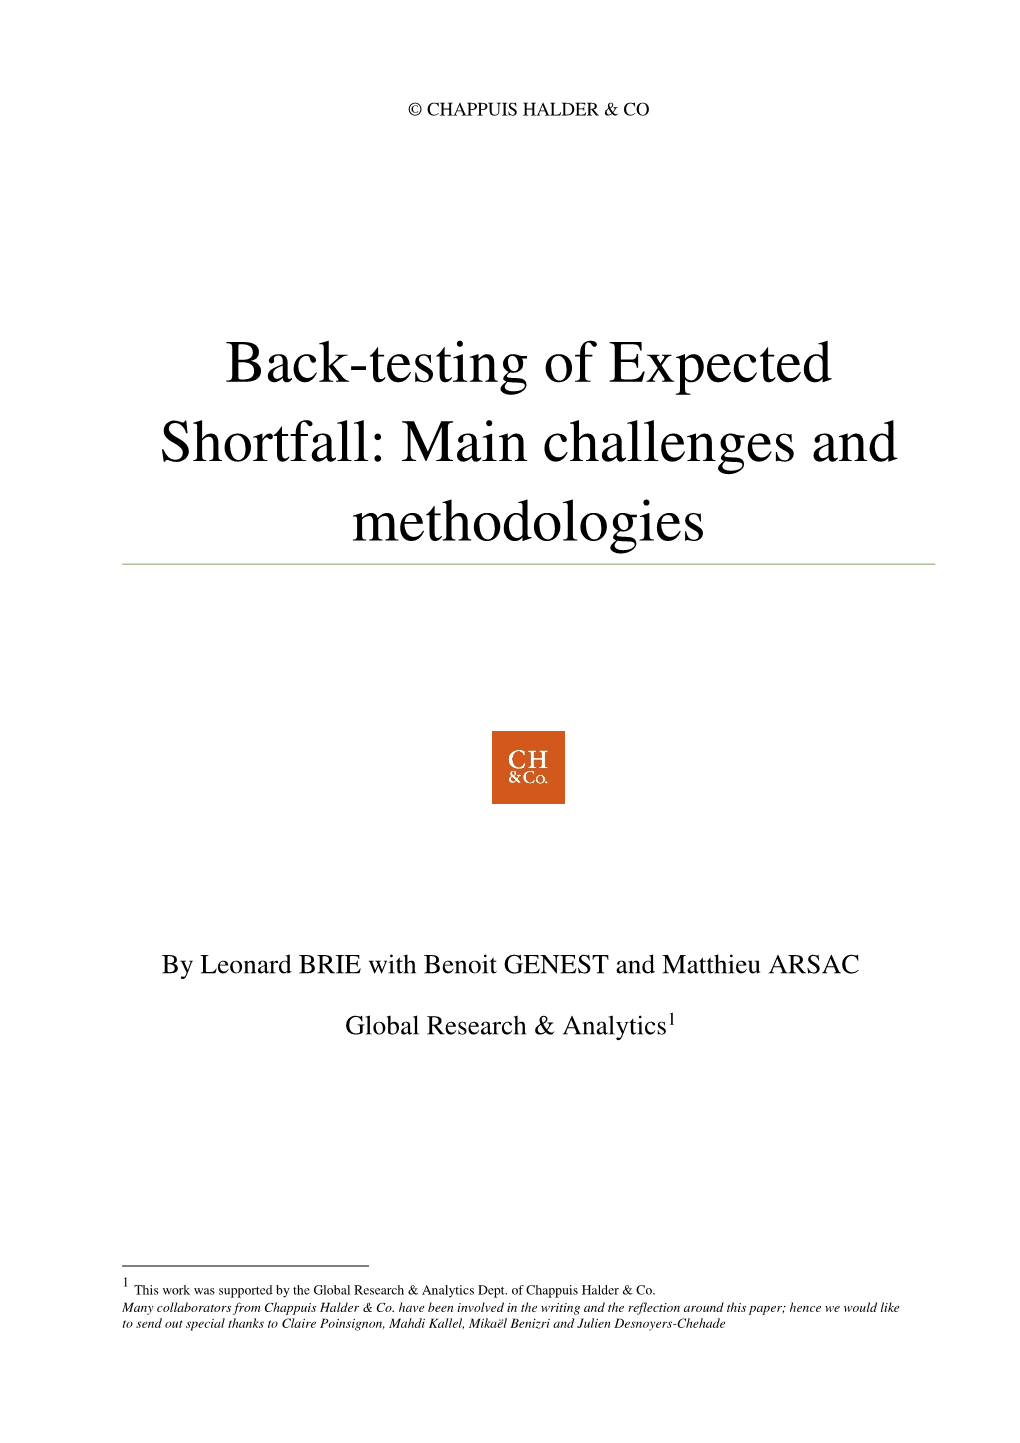 Back-Testing of Expected Shortfall: Main Challenges and Methodologies